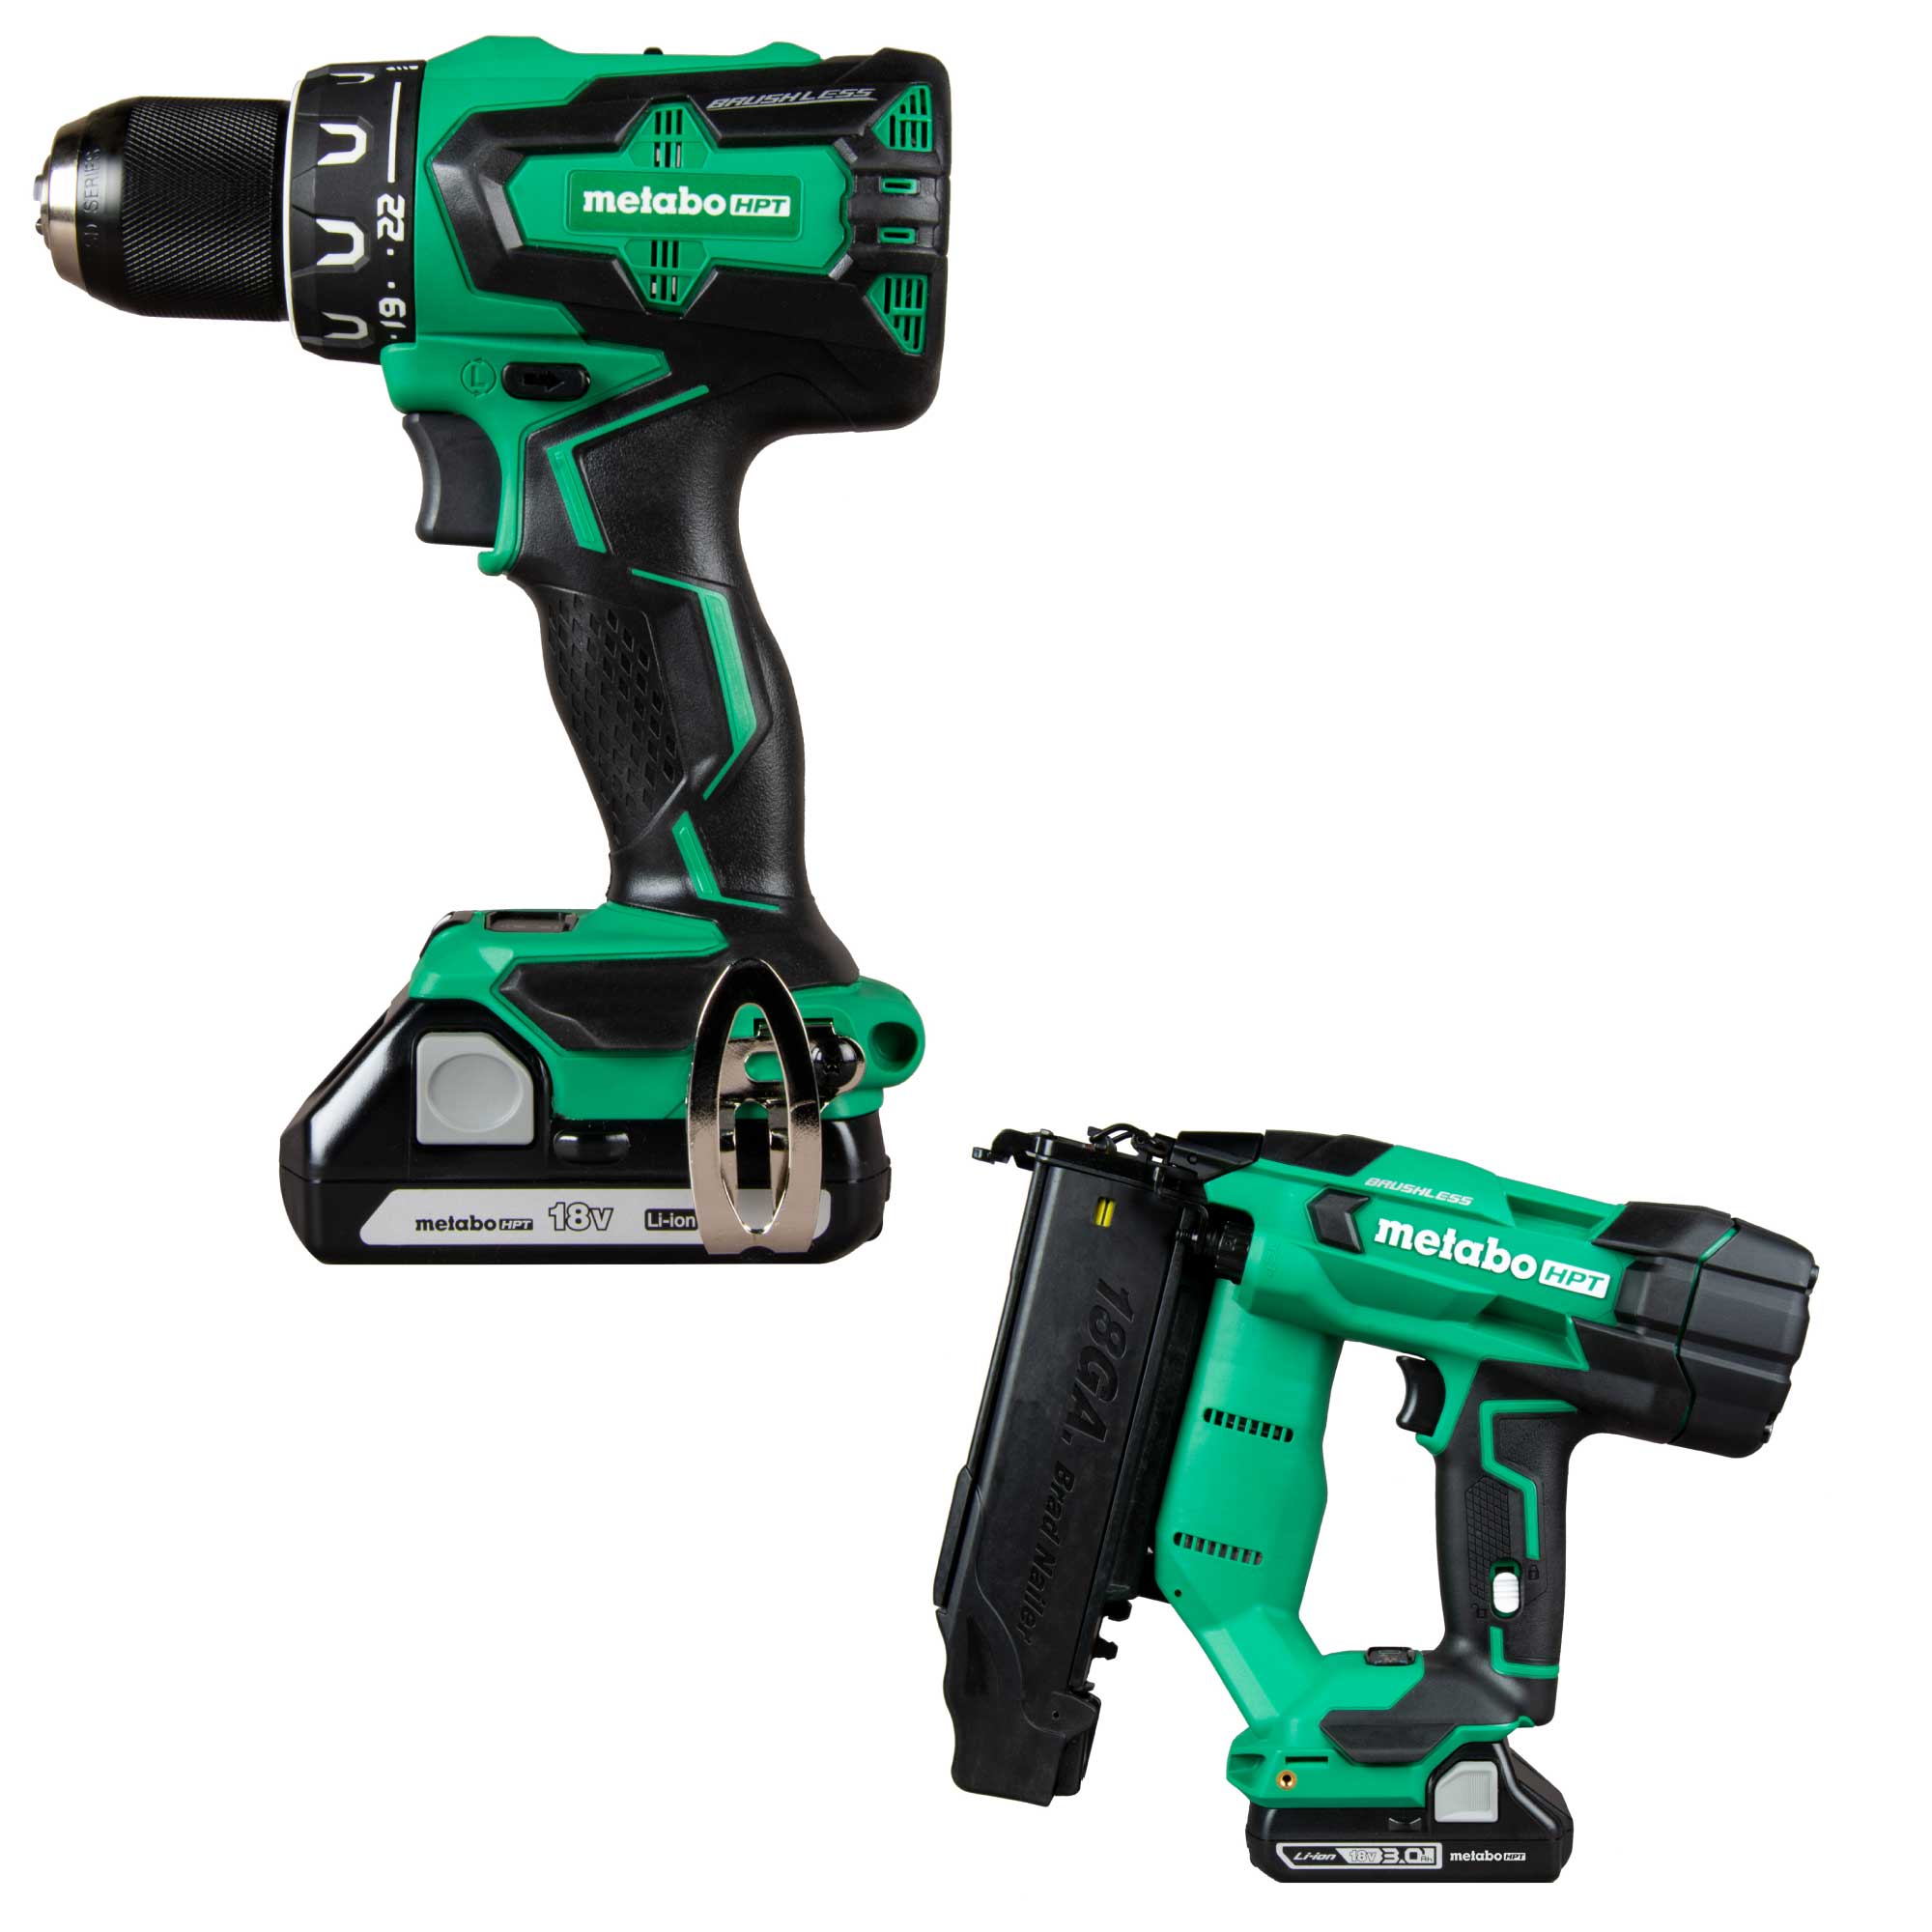 Metabo HPT MultiVolt 18-Volt 1/2-in Brushless Cordless Drill (2-batteries included and charger included) with MultiVolt 18-Gauge 18-volt Cordless